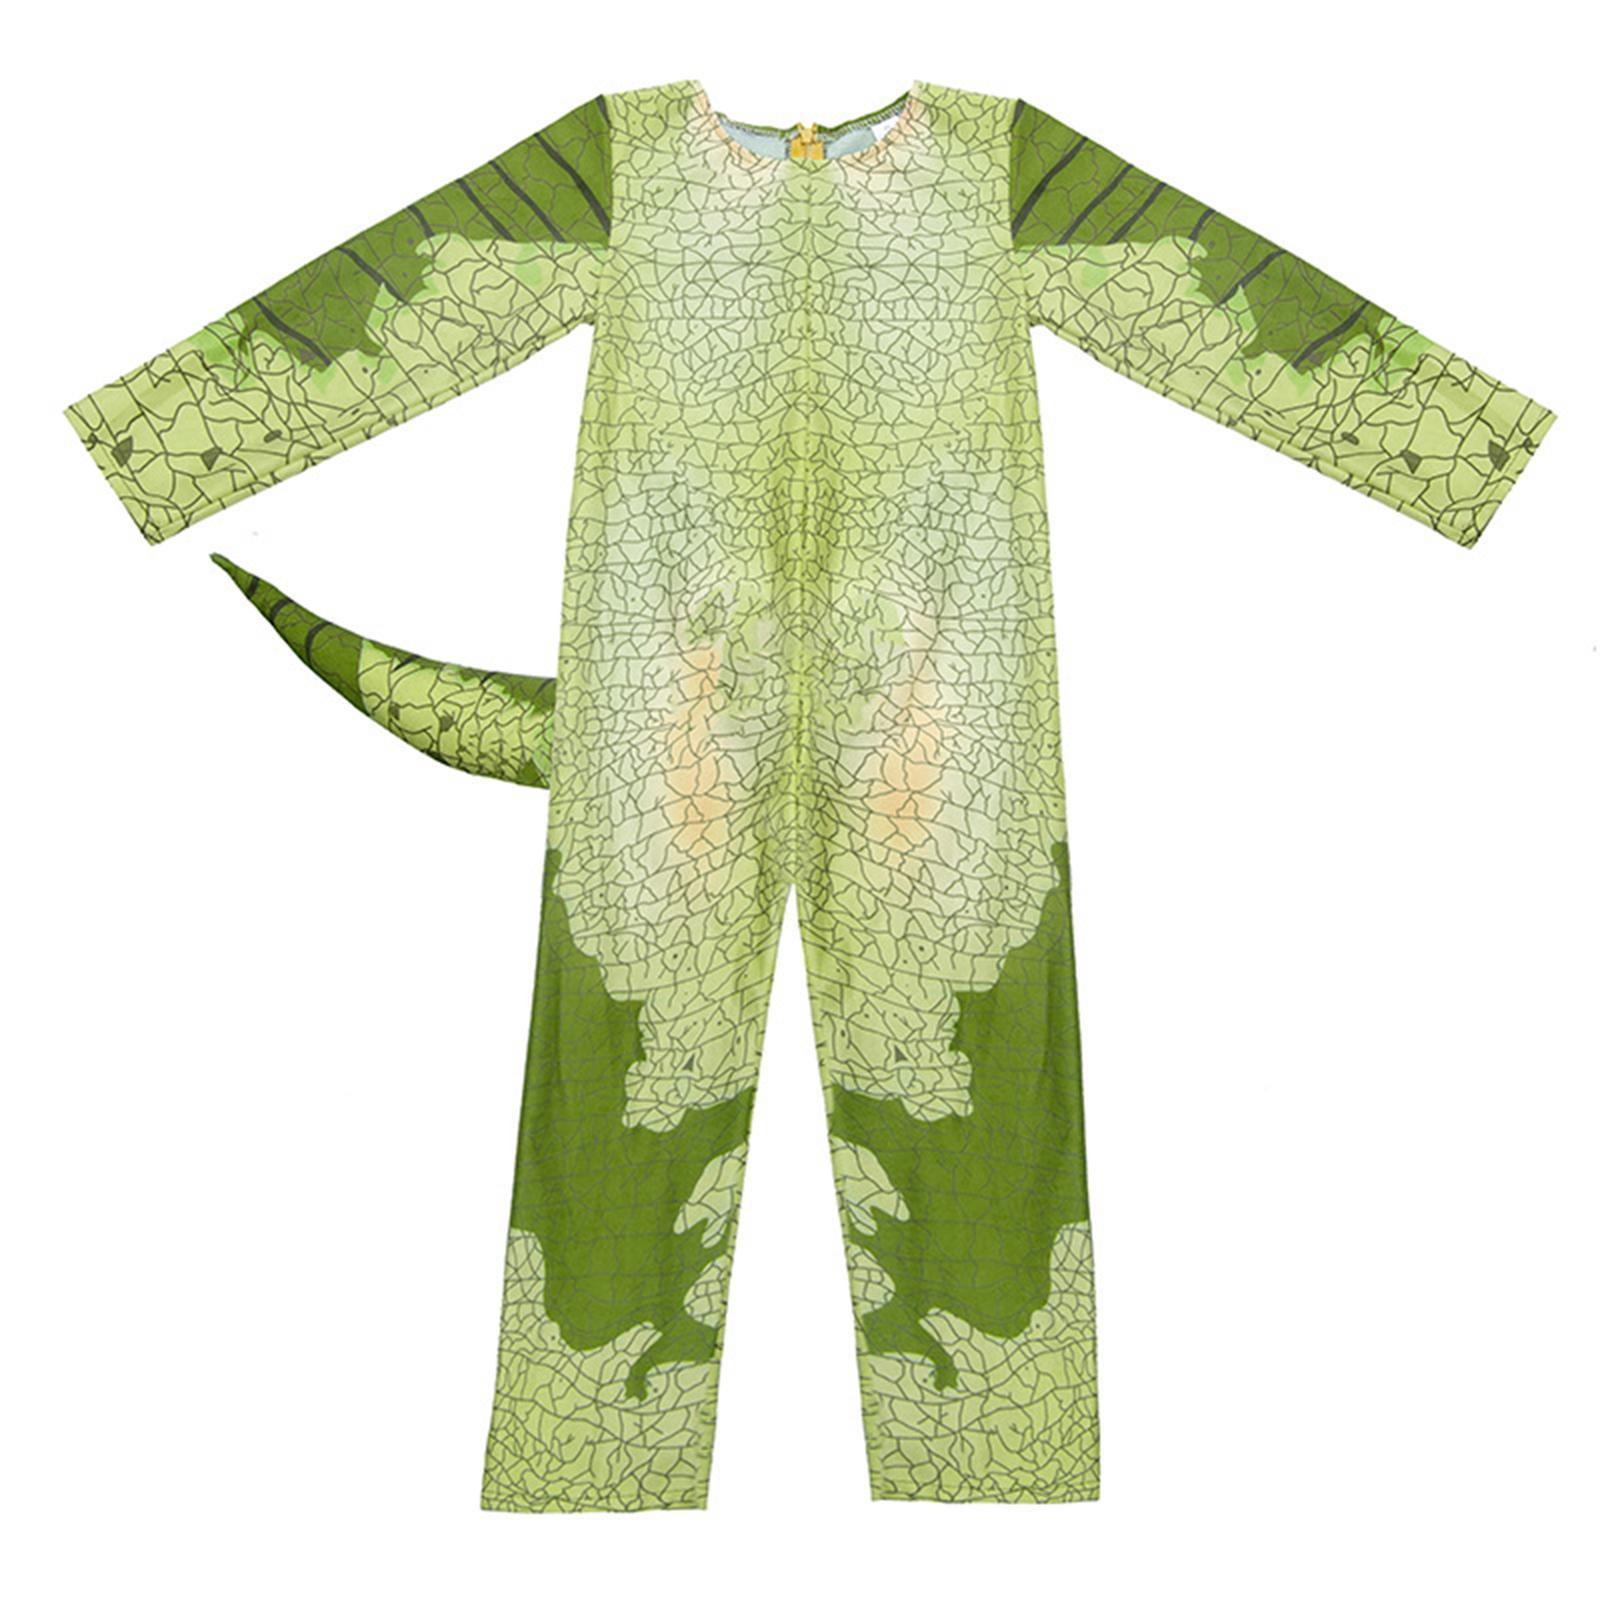 Kids Dinosaur Costume Unisex Green Suit for Dress up Party Cosplay Toddler